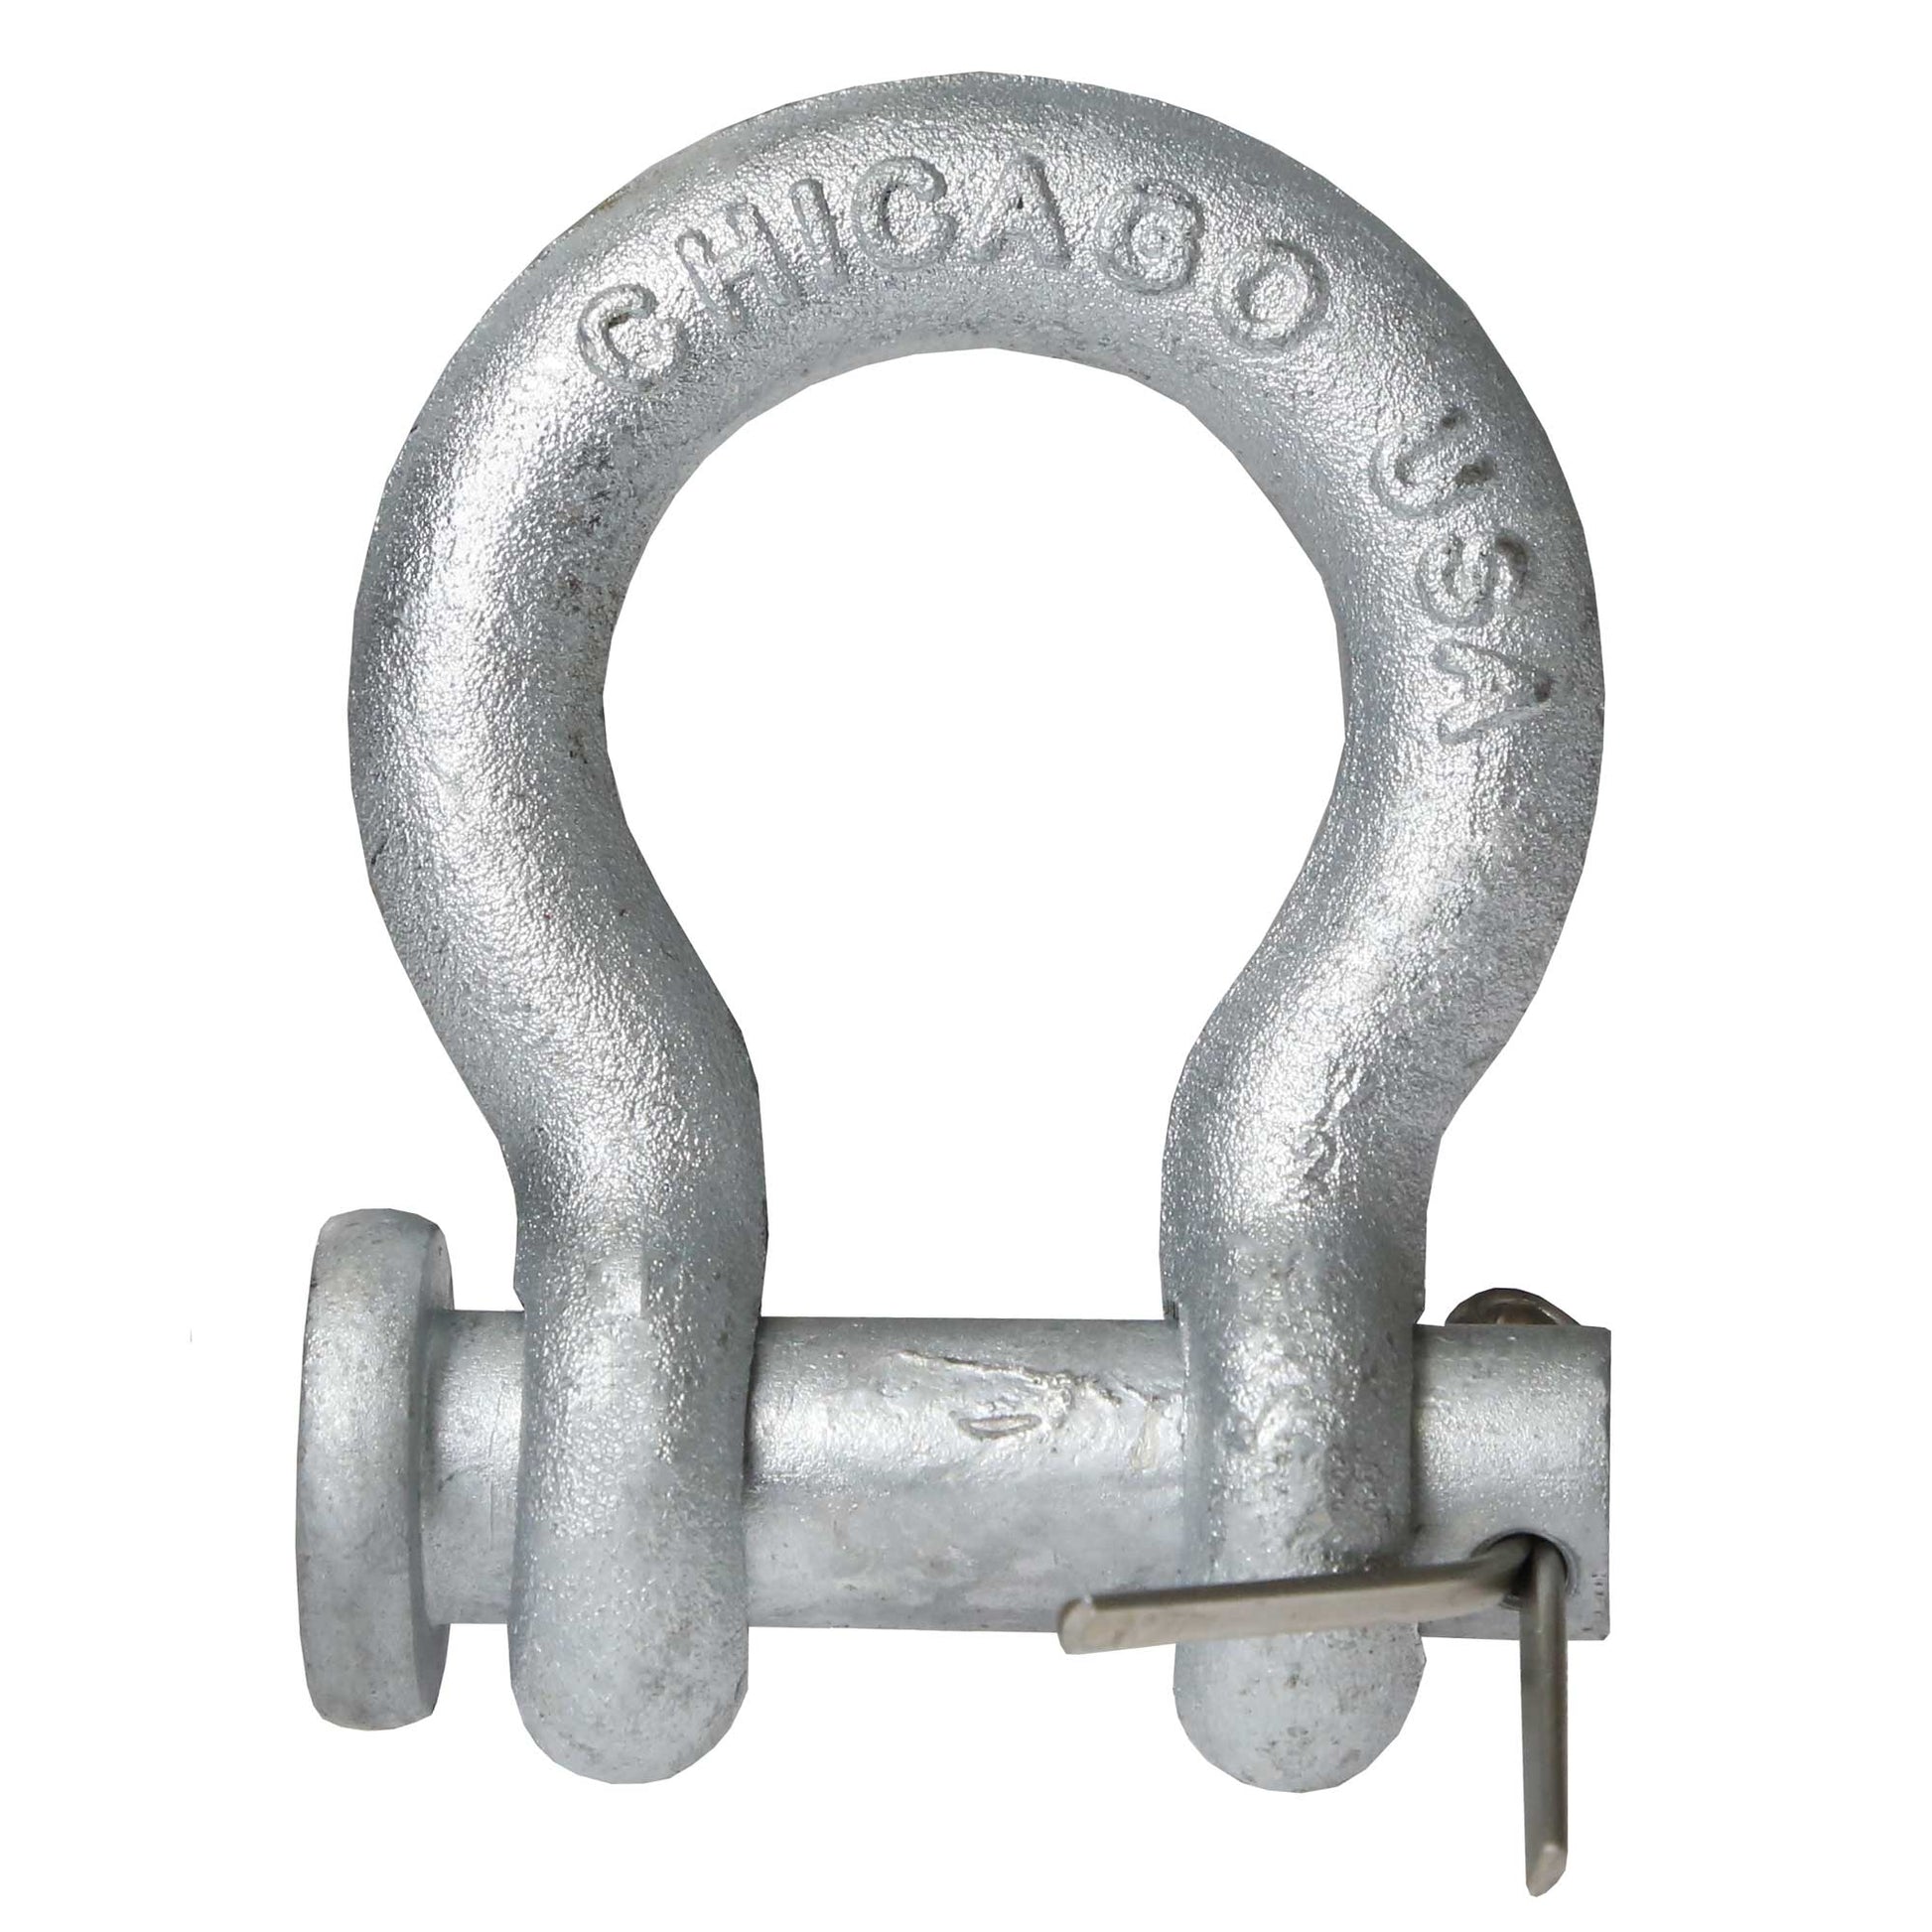 Anchor Shackle - Chicago Hardware - Round Pin - 1" Galvanized Steel - 8.5 Ton primary image